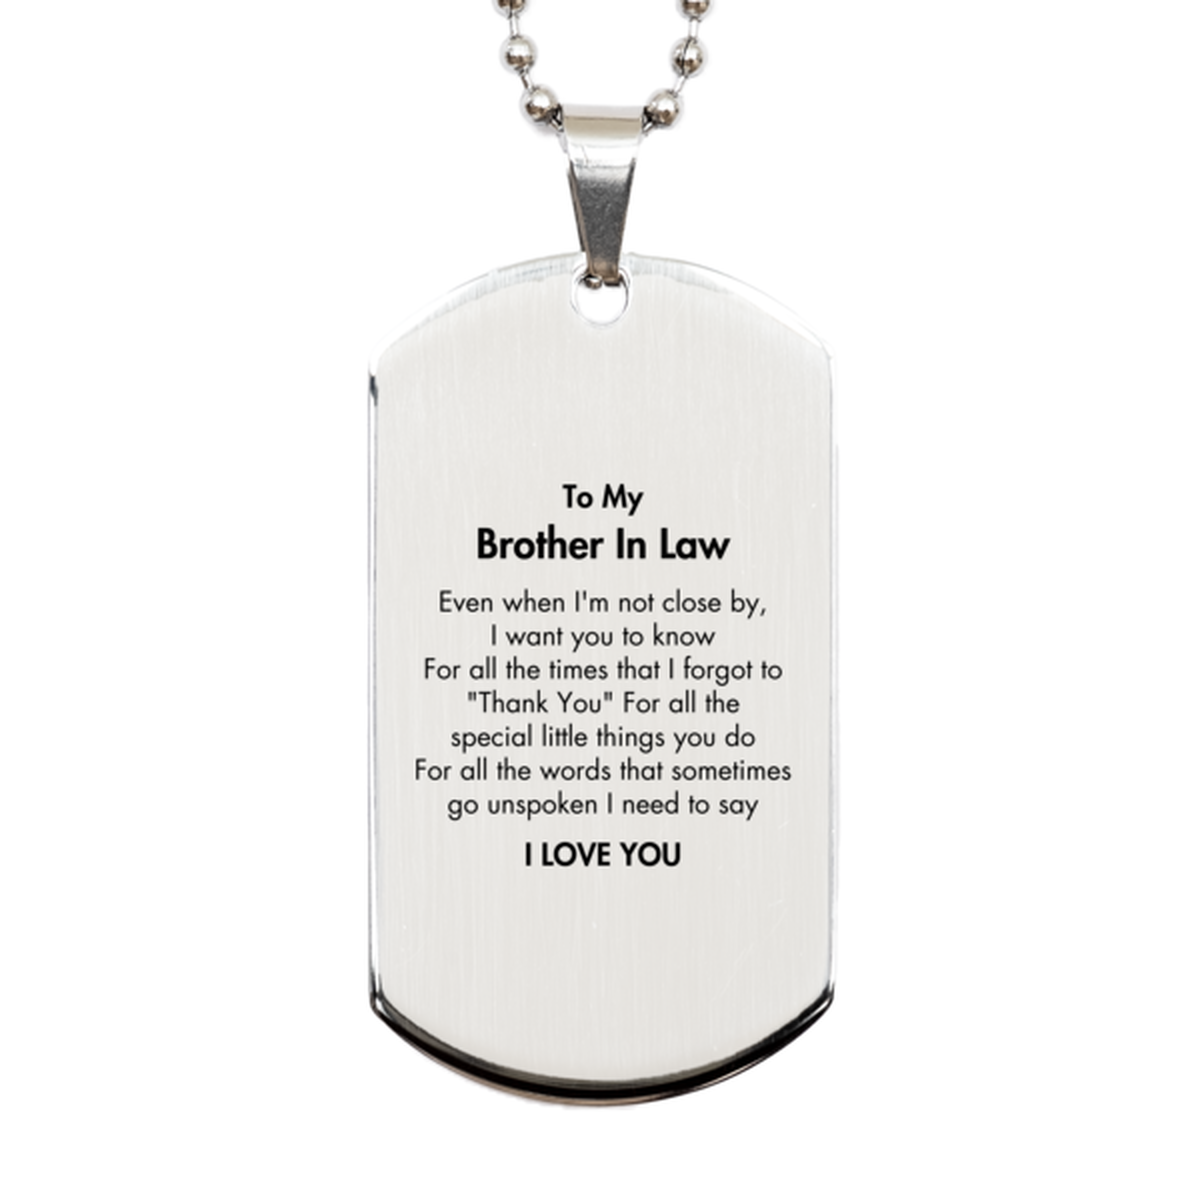 Thank You Gifts for Brother In Law, Keepsake Silver Dog Tag Gifts for Brother In Law Birthday Mother's day Father's Day Brother In Law For all the words That sometimes go unspoken I need to say I LOVE YOU